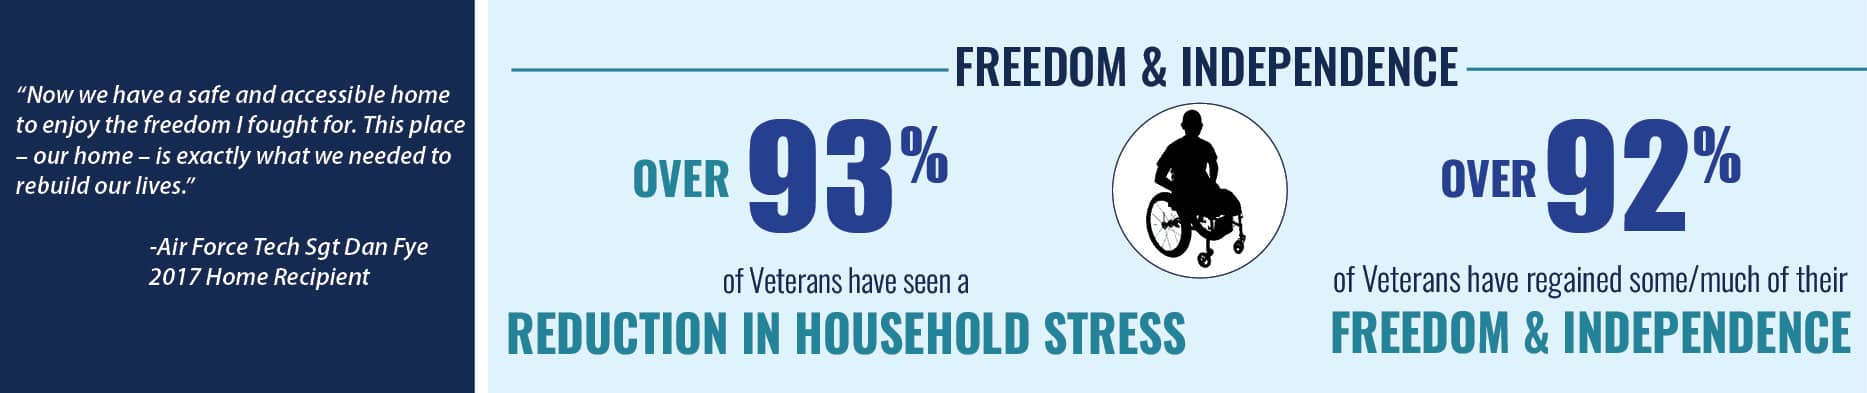 Homes For Our Troops Accessible Homes Impact - Freedom and Independence